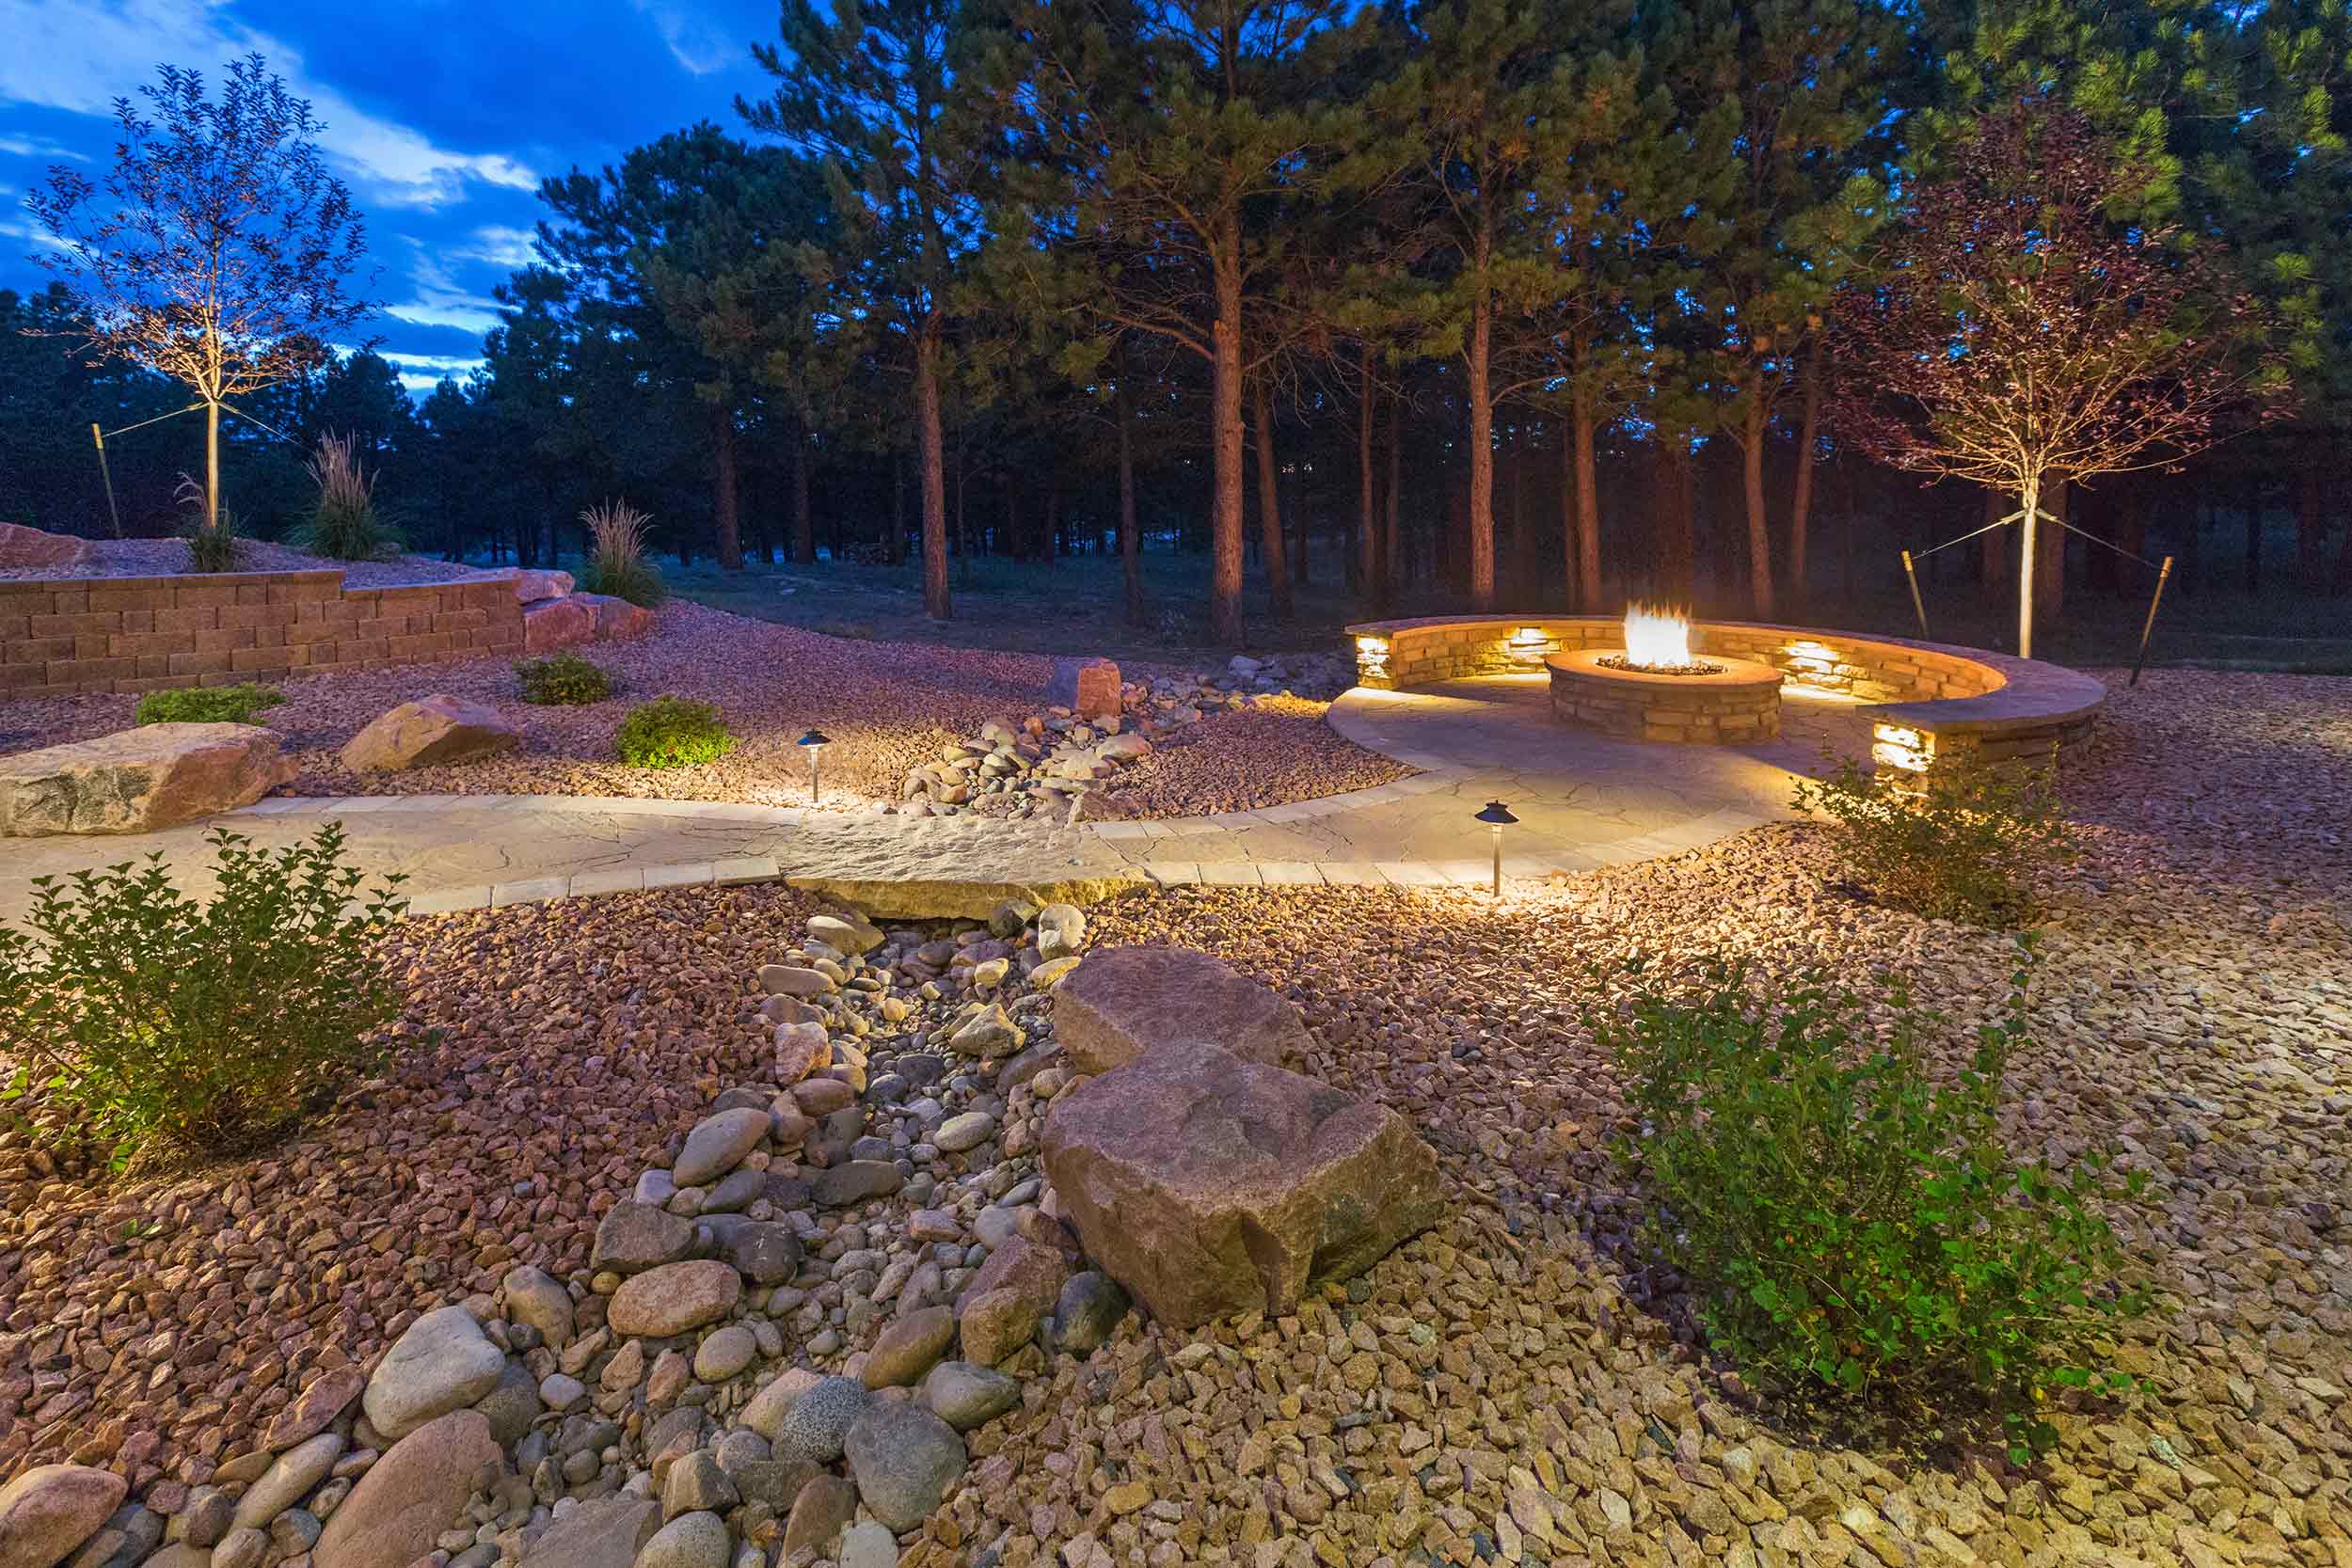 Landscaping and Hardscaping - Firepit with bench seating.